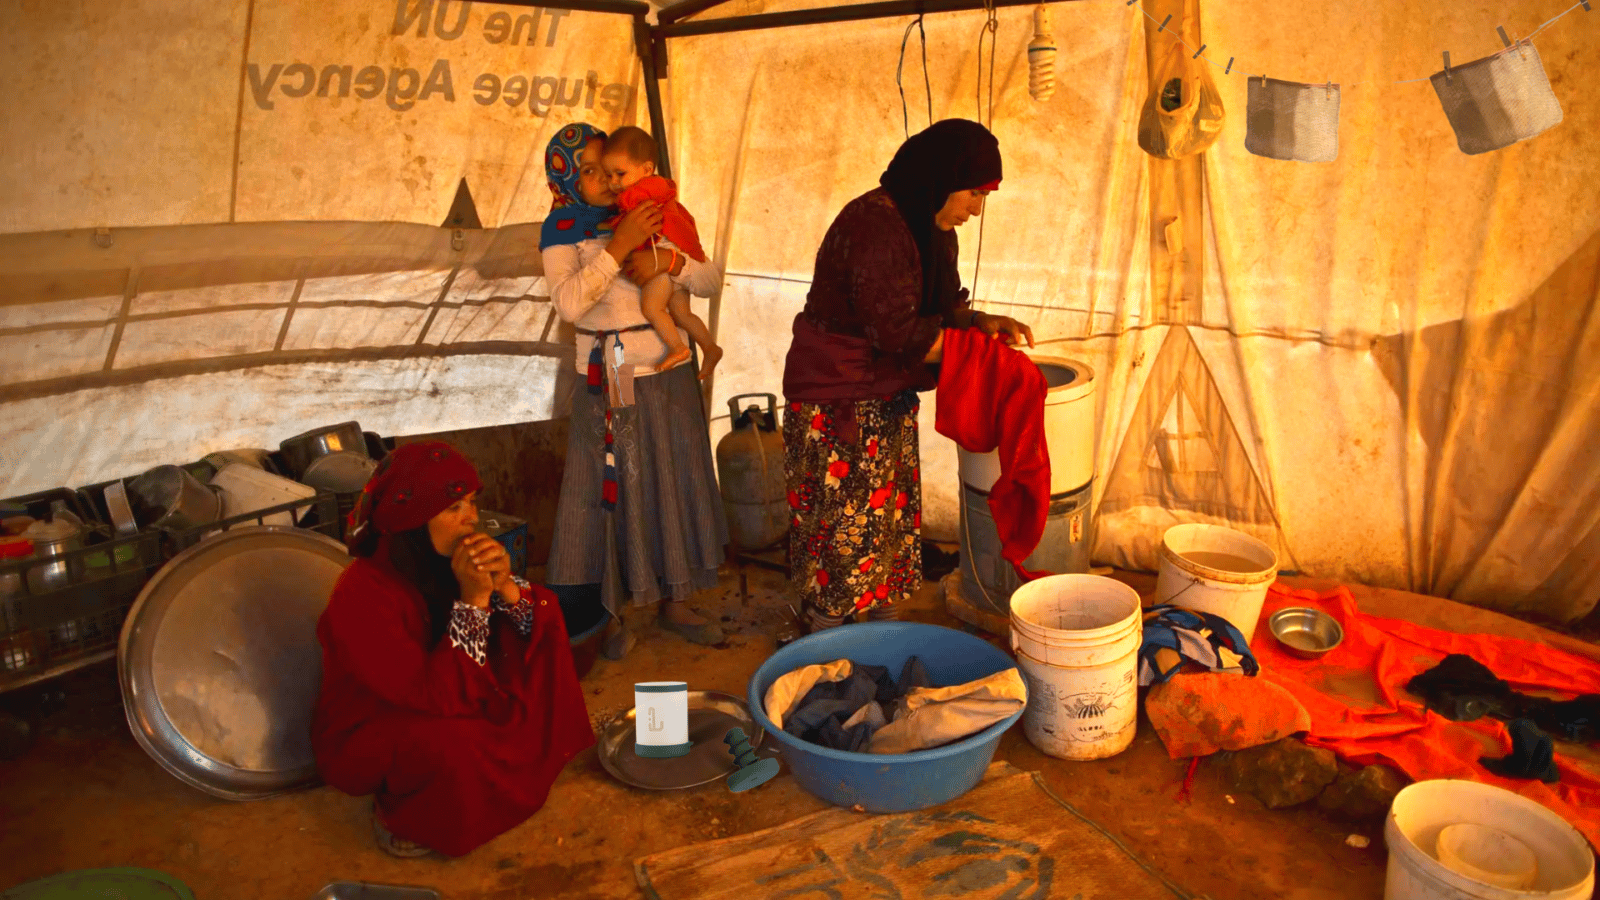 An in-context image, Lena in a refugee camp being used by a family